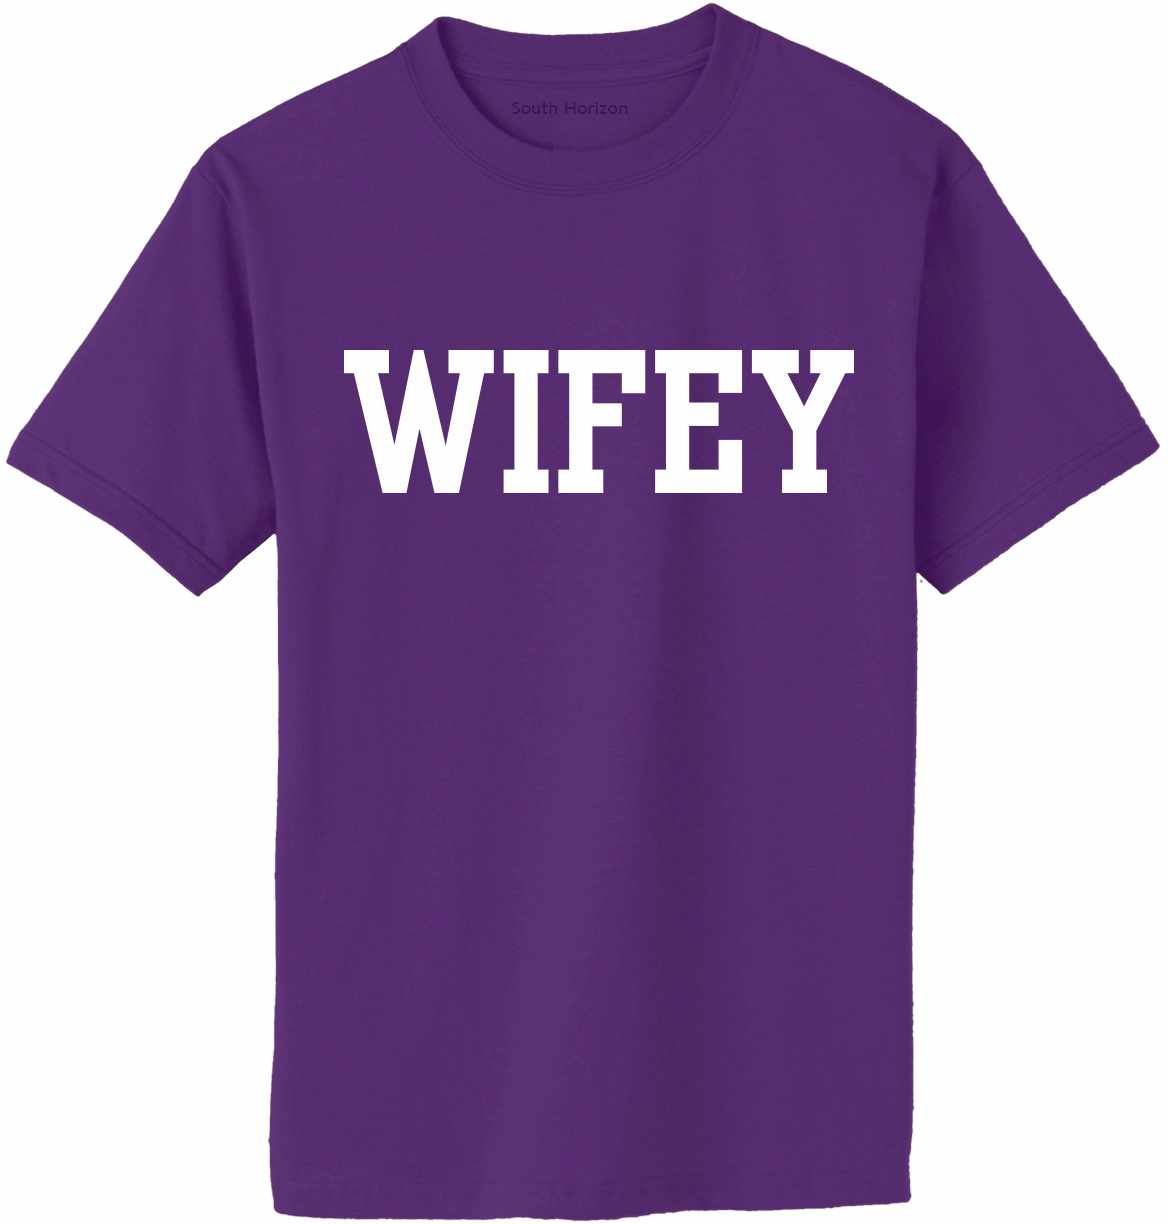 WIFEY on Adult T-Shirt